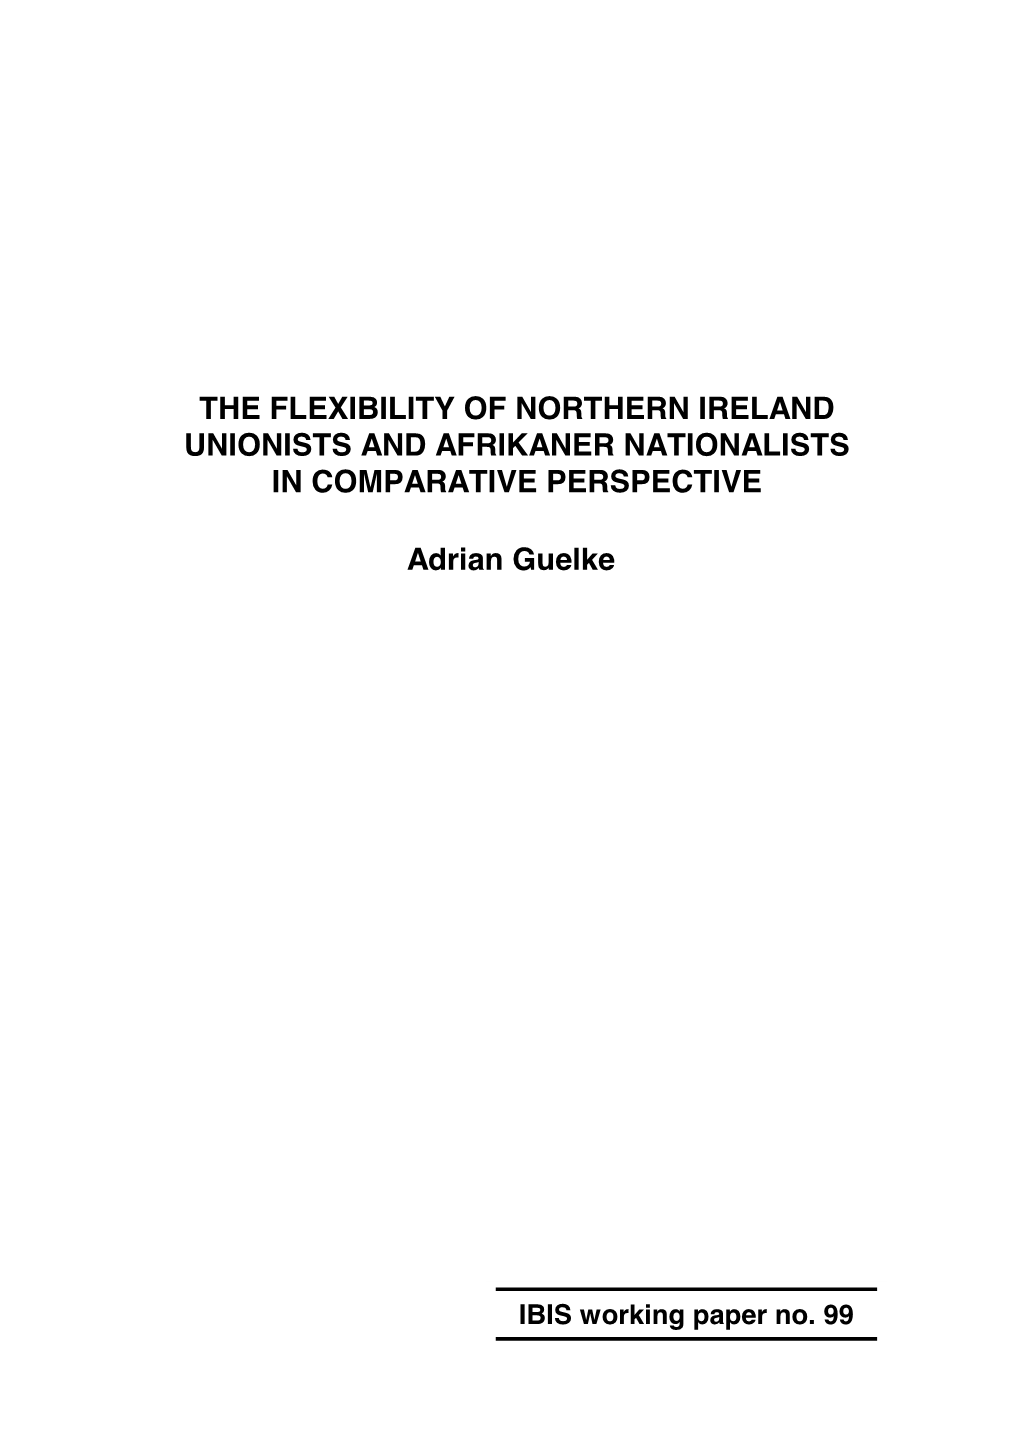 The Flexibility of Northern Ireland Unionists and Afrikaner Nationalists in Comparative Perspective